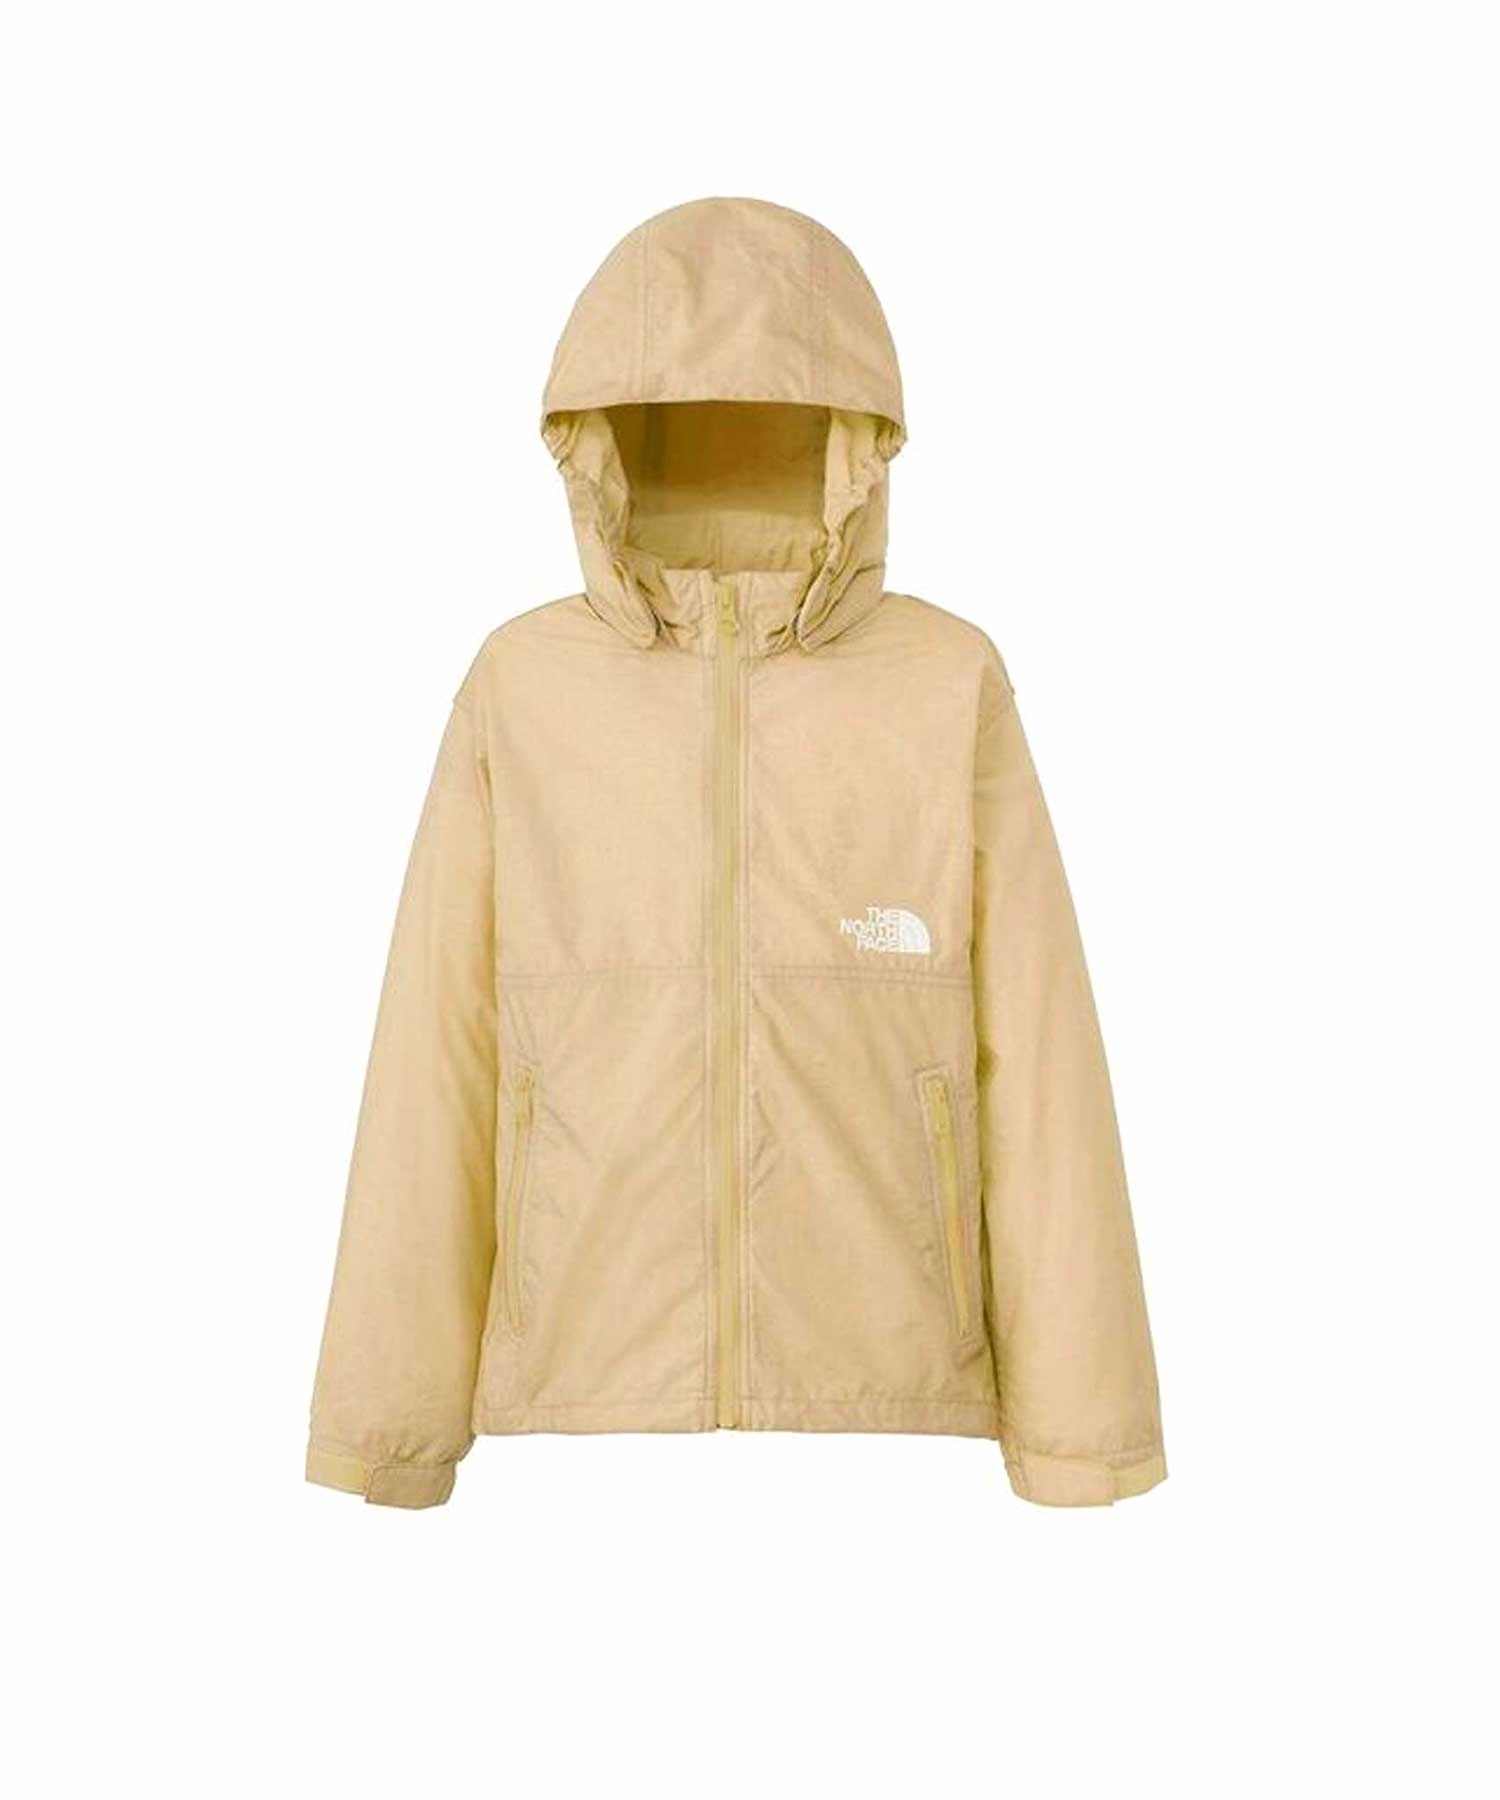 THE NORTH FACE ザ・ノース・フェイス COMPACT JACKET キッズ ジュニア 